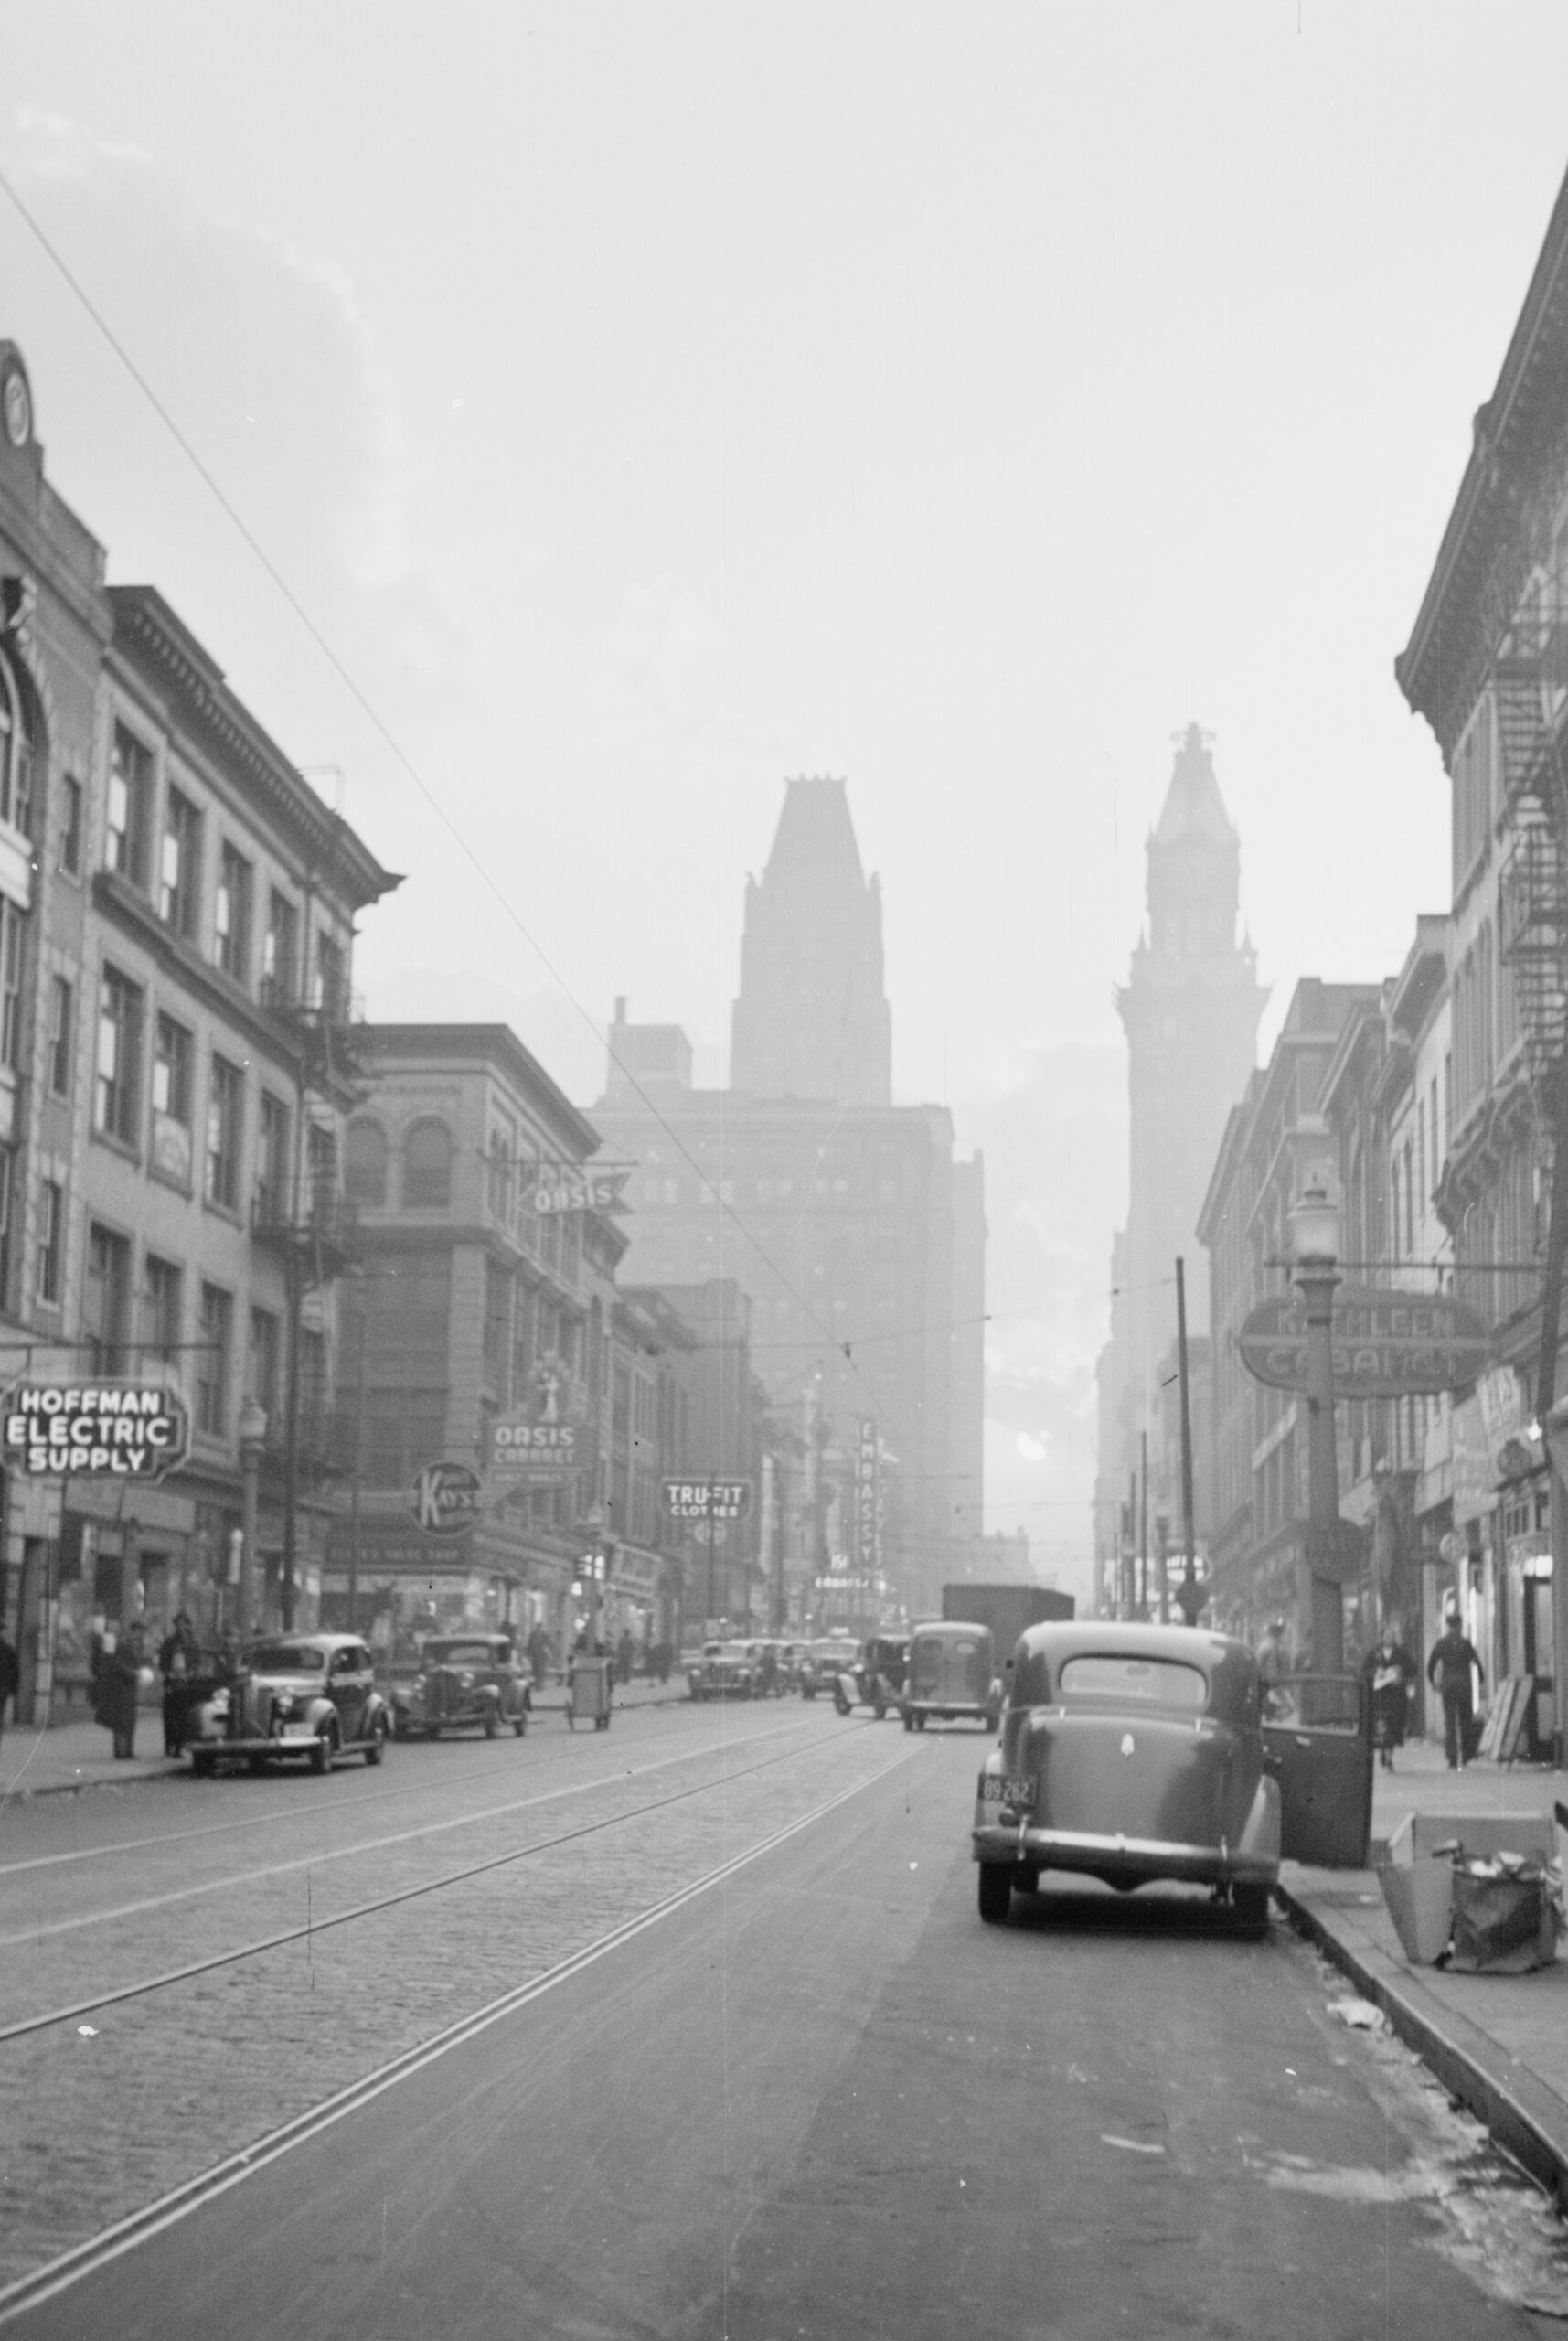 Do You Recognize This 1939 View of Baltimore? Add Your Comments Below! -  Ghosts of Baltimore